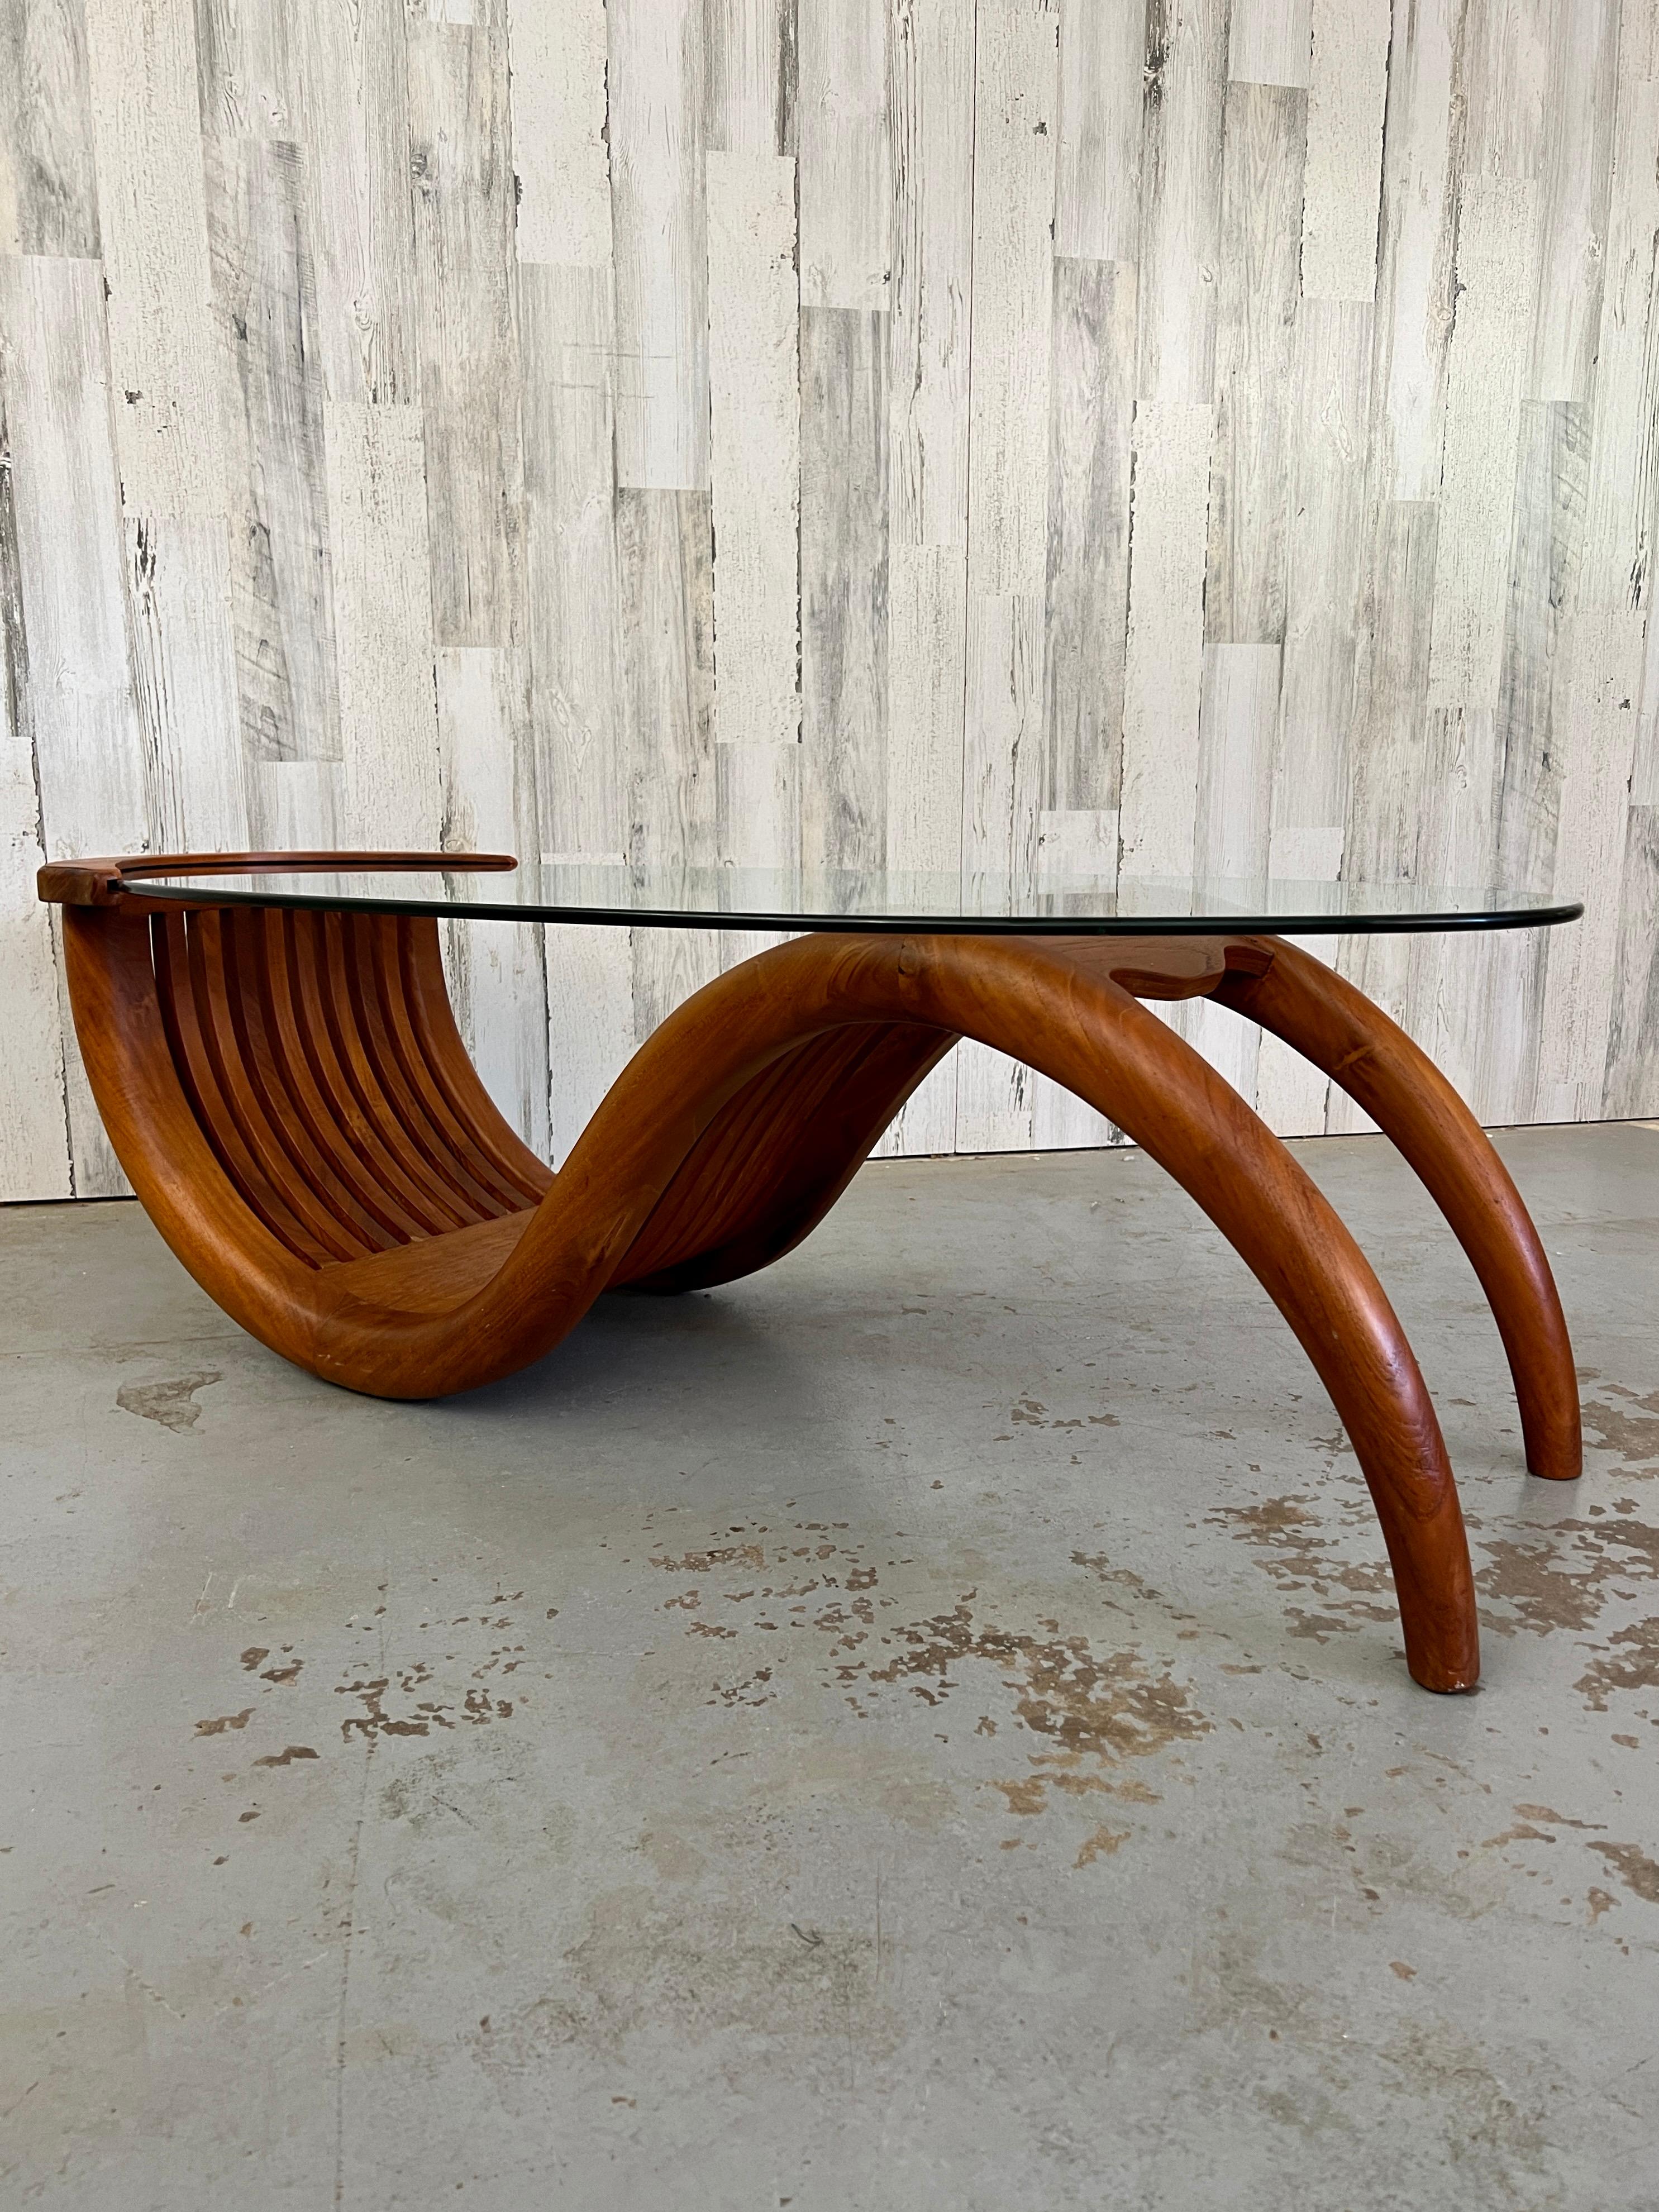 Sculpted Teak with Oval Glass Coffee Table In Good Condition For Sale In Denton, TX